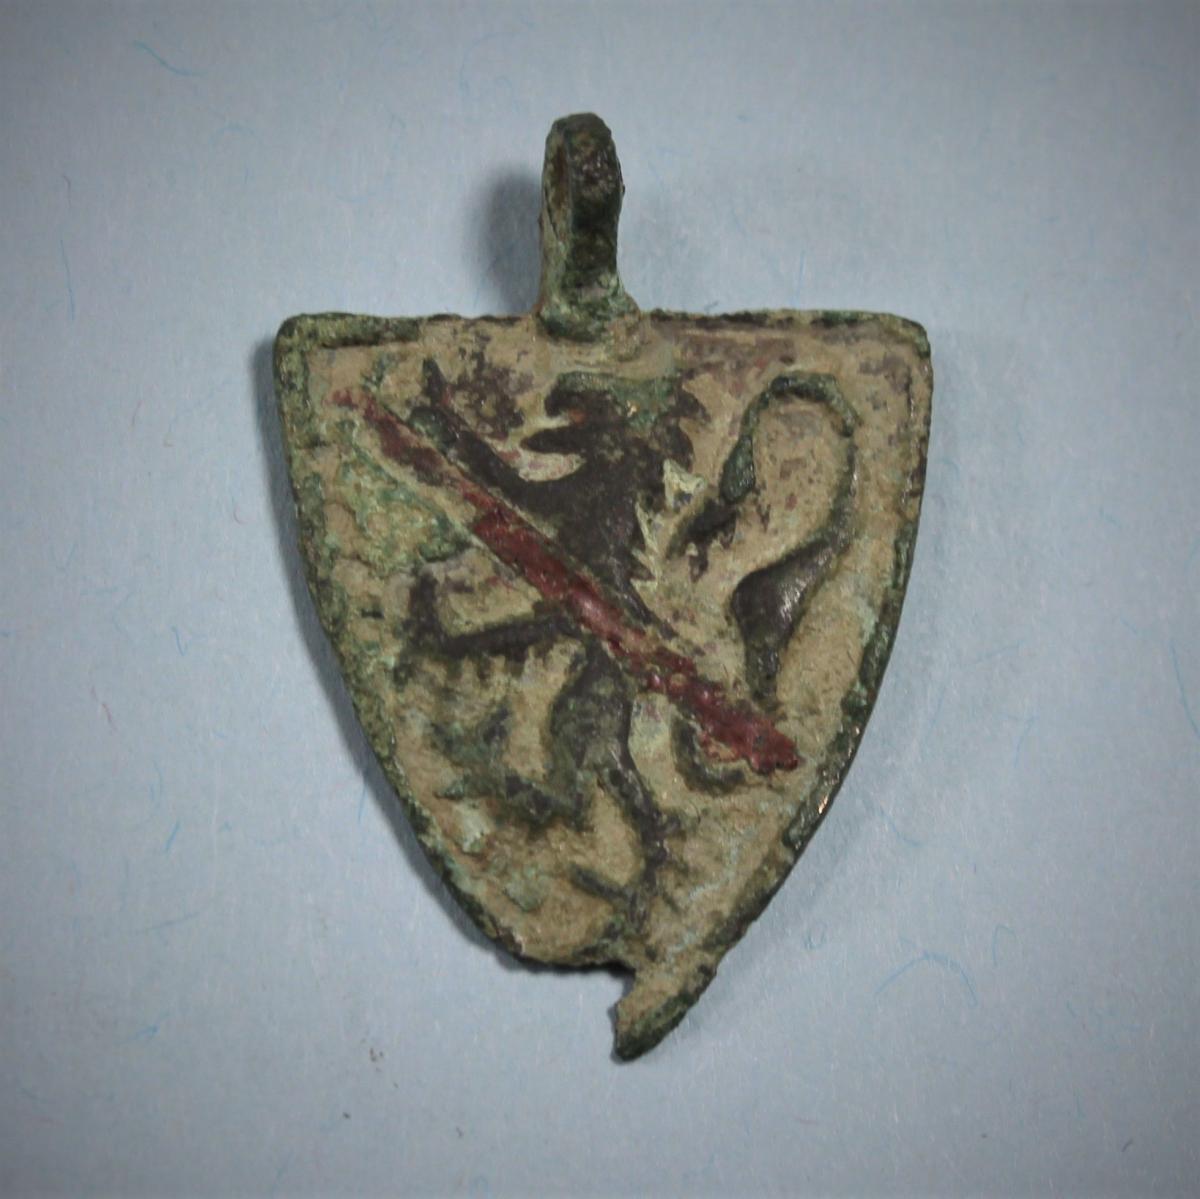 BURNELL - MEDIEVAL English Horse Harness Pendant. 13th/14th Century.